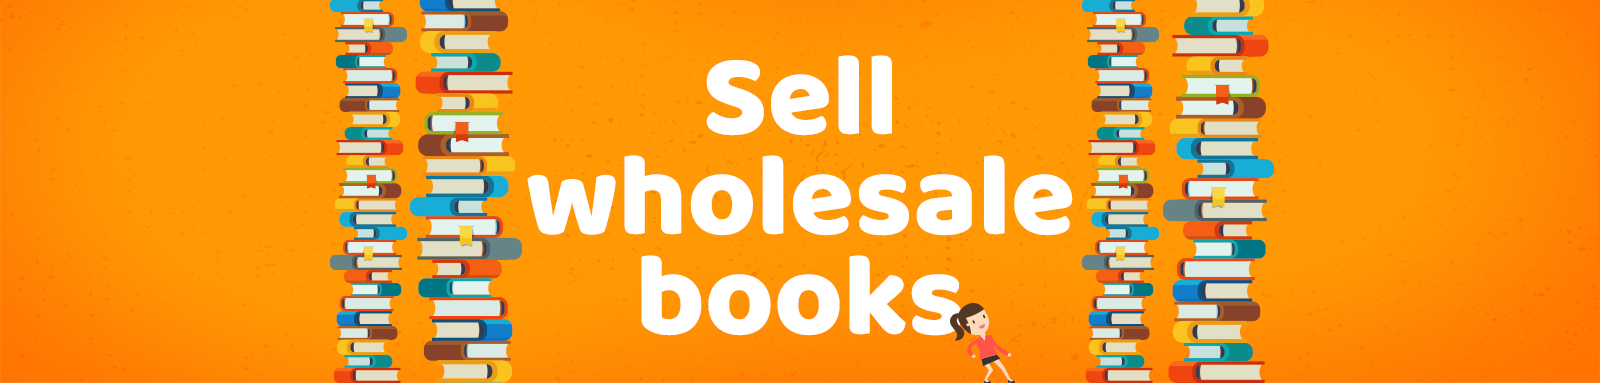 Sell Wholesale Books